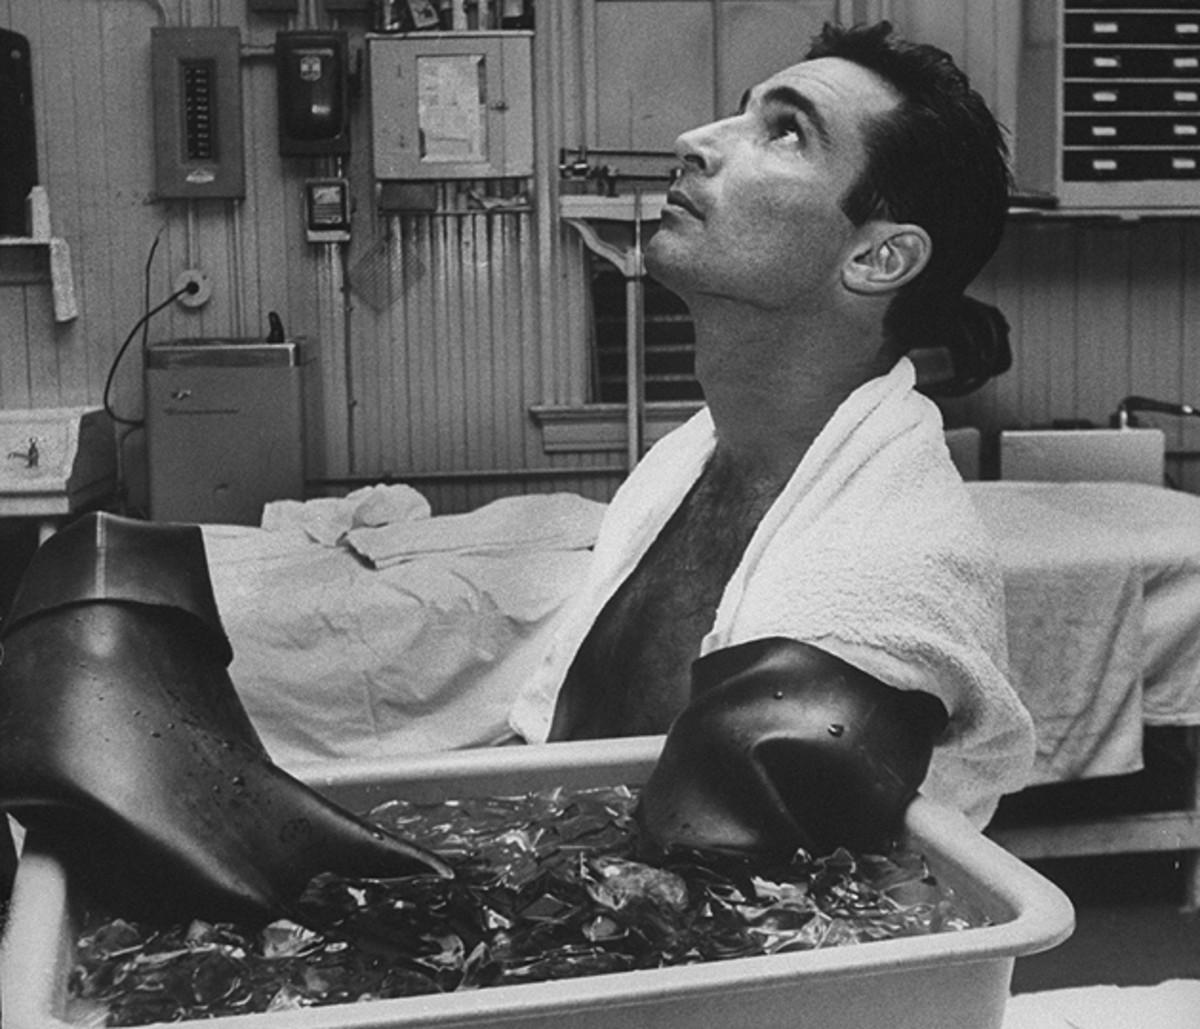 Koufax, shown here after facing the Mets on Sept. 6, 1966, retired due to traumatic arthritis in his left arm.